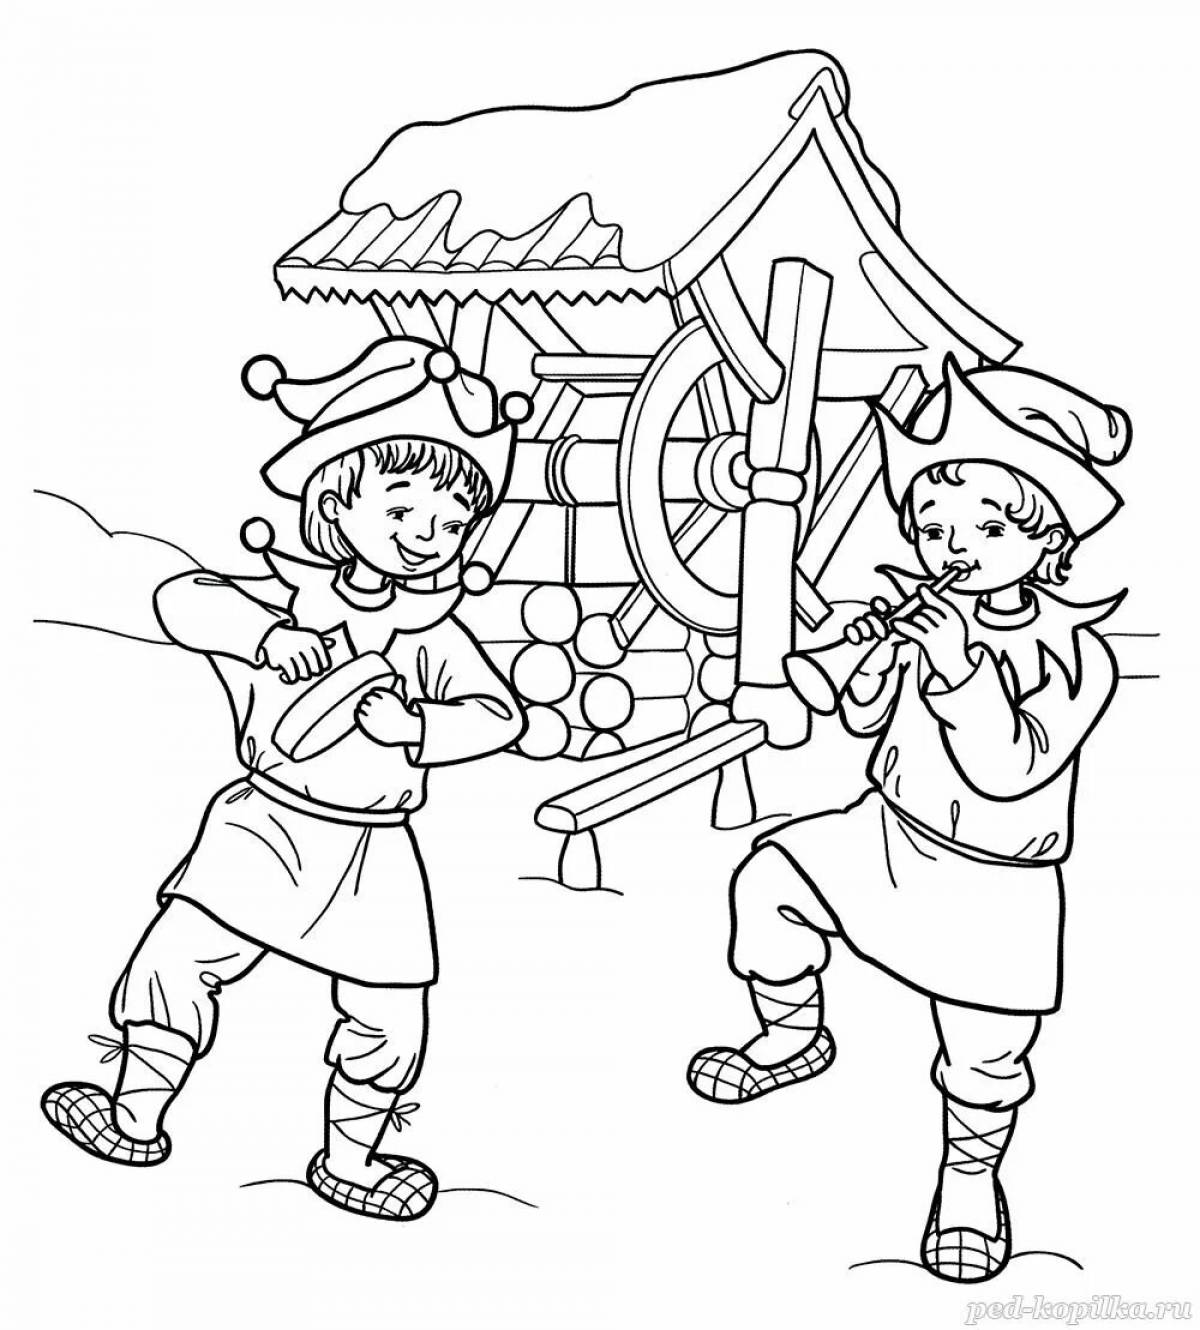 Color-wild carol coloring page for children 6-7 years old